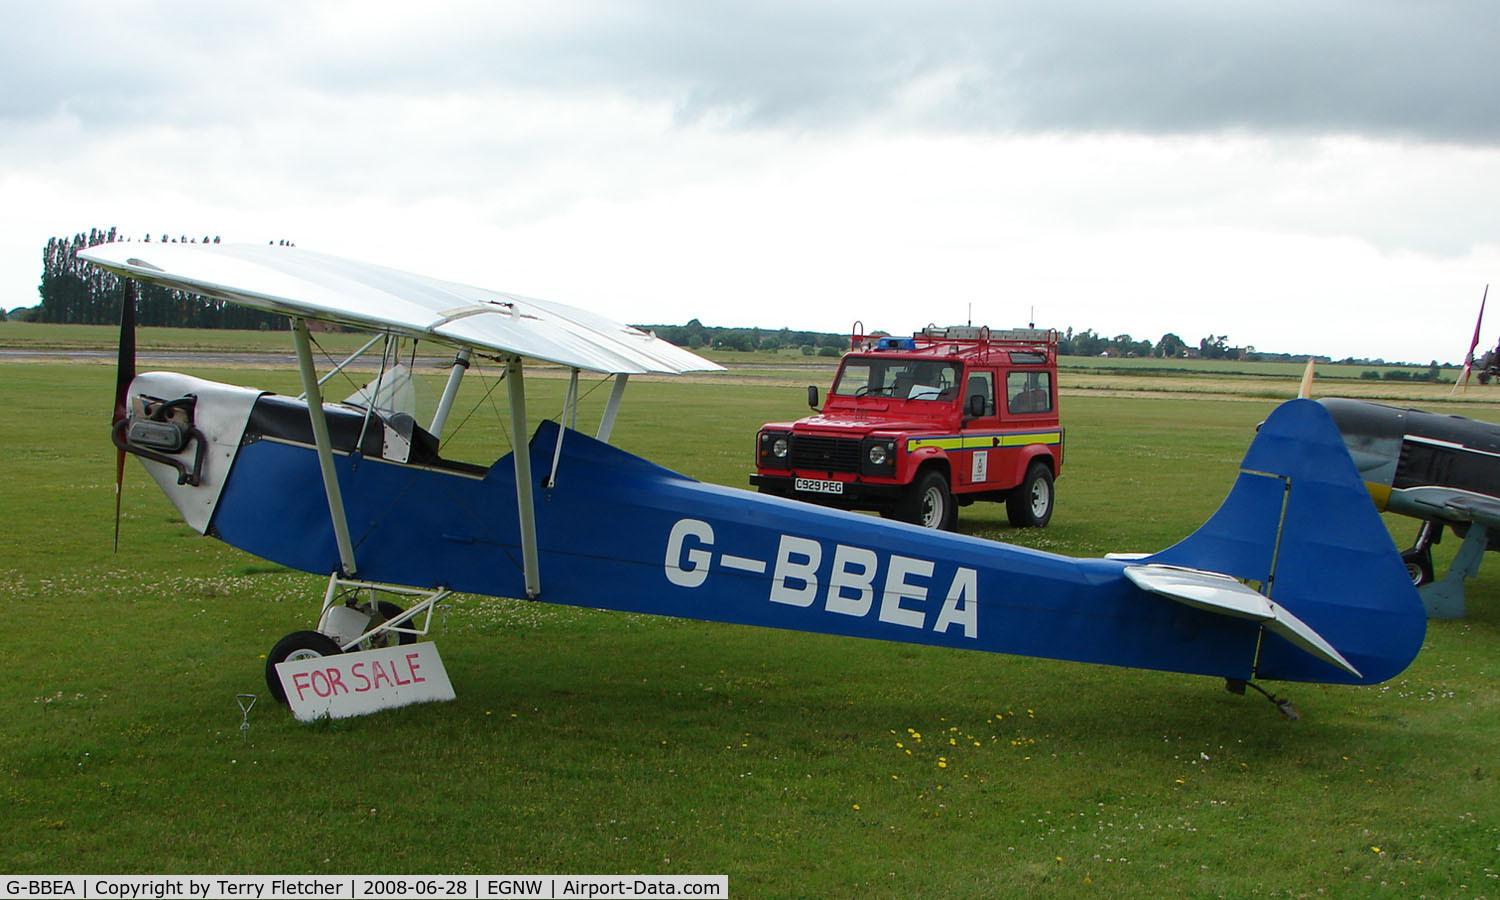 G-BBEA, 1975 Luton LA4A Minor C/N PFA 843, Luton Minor ' up For sale ' at Wickenby Wings and Wheels 2008